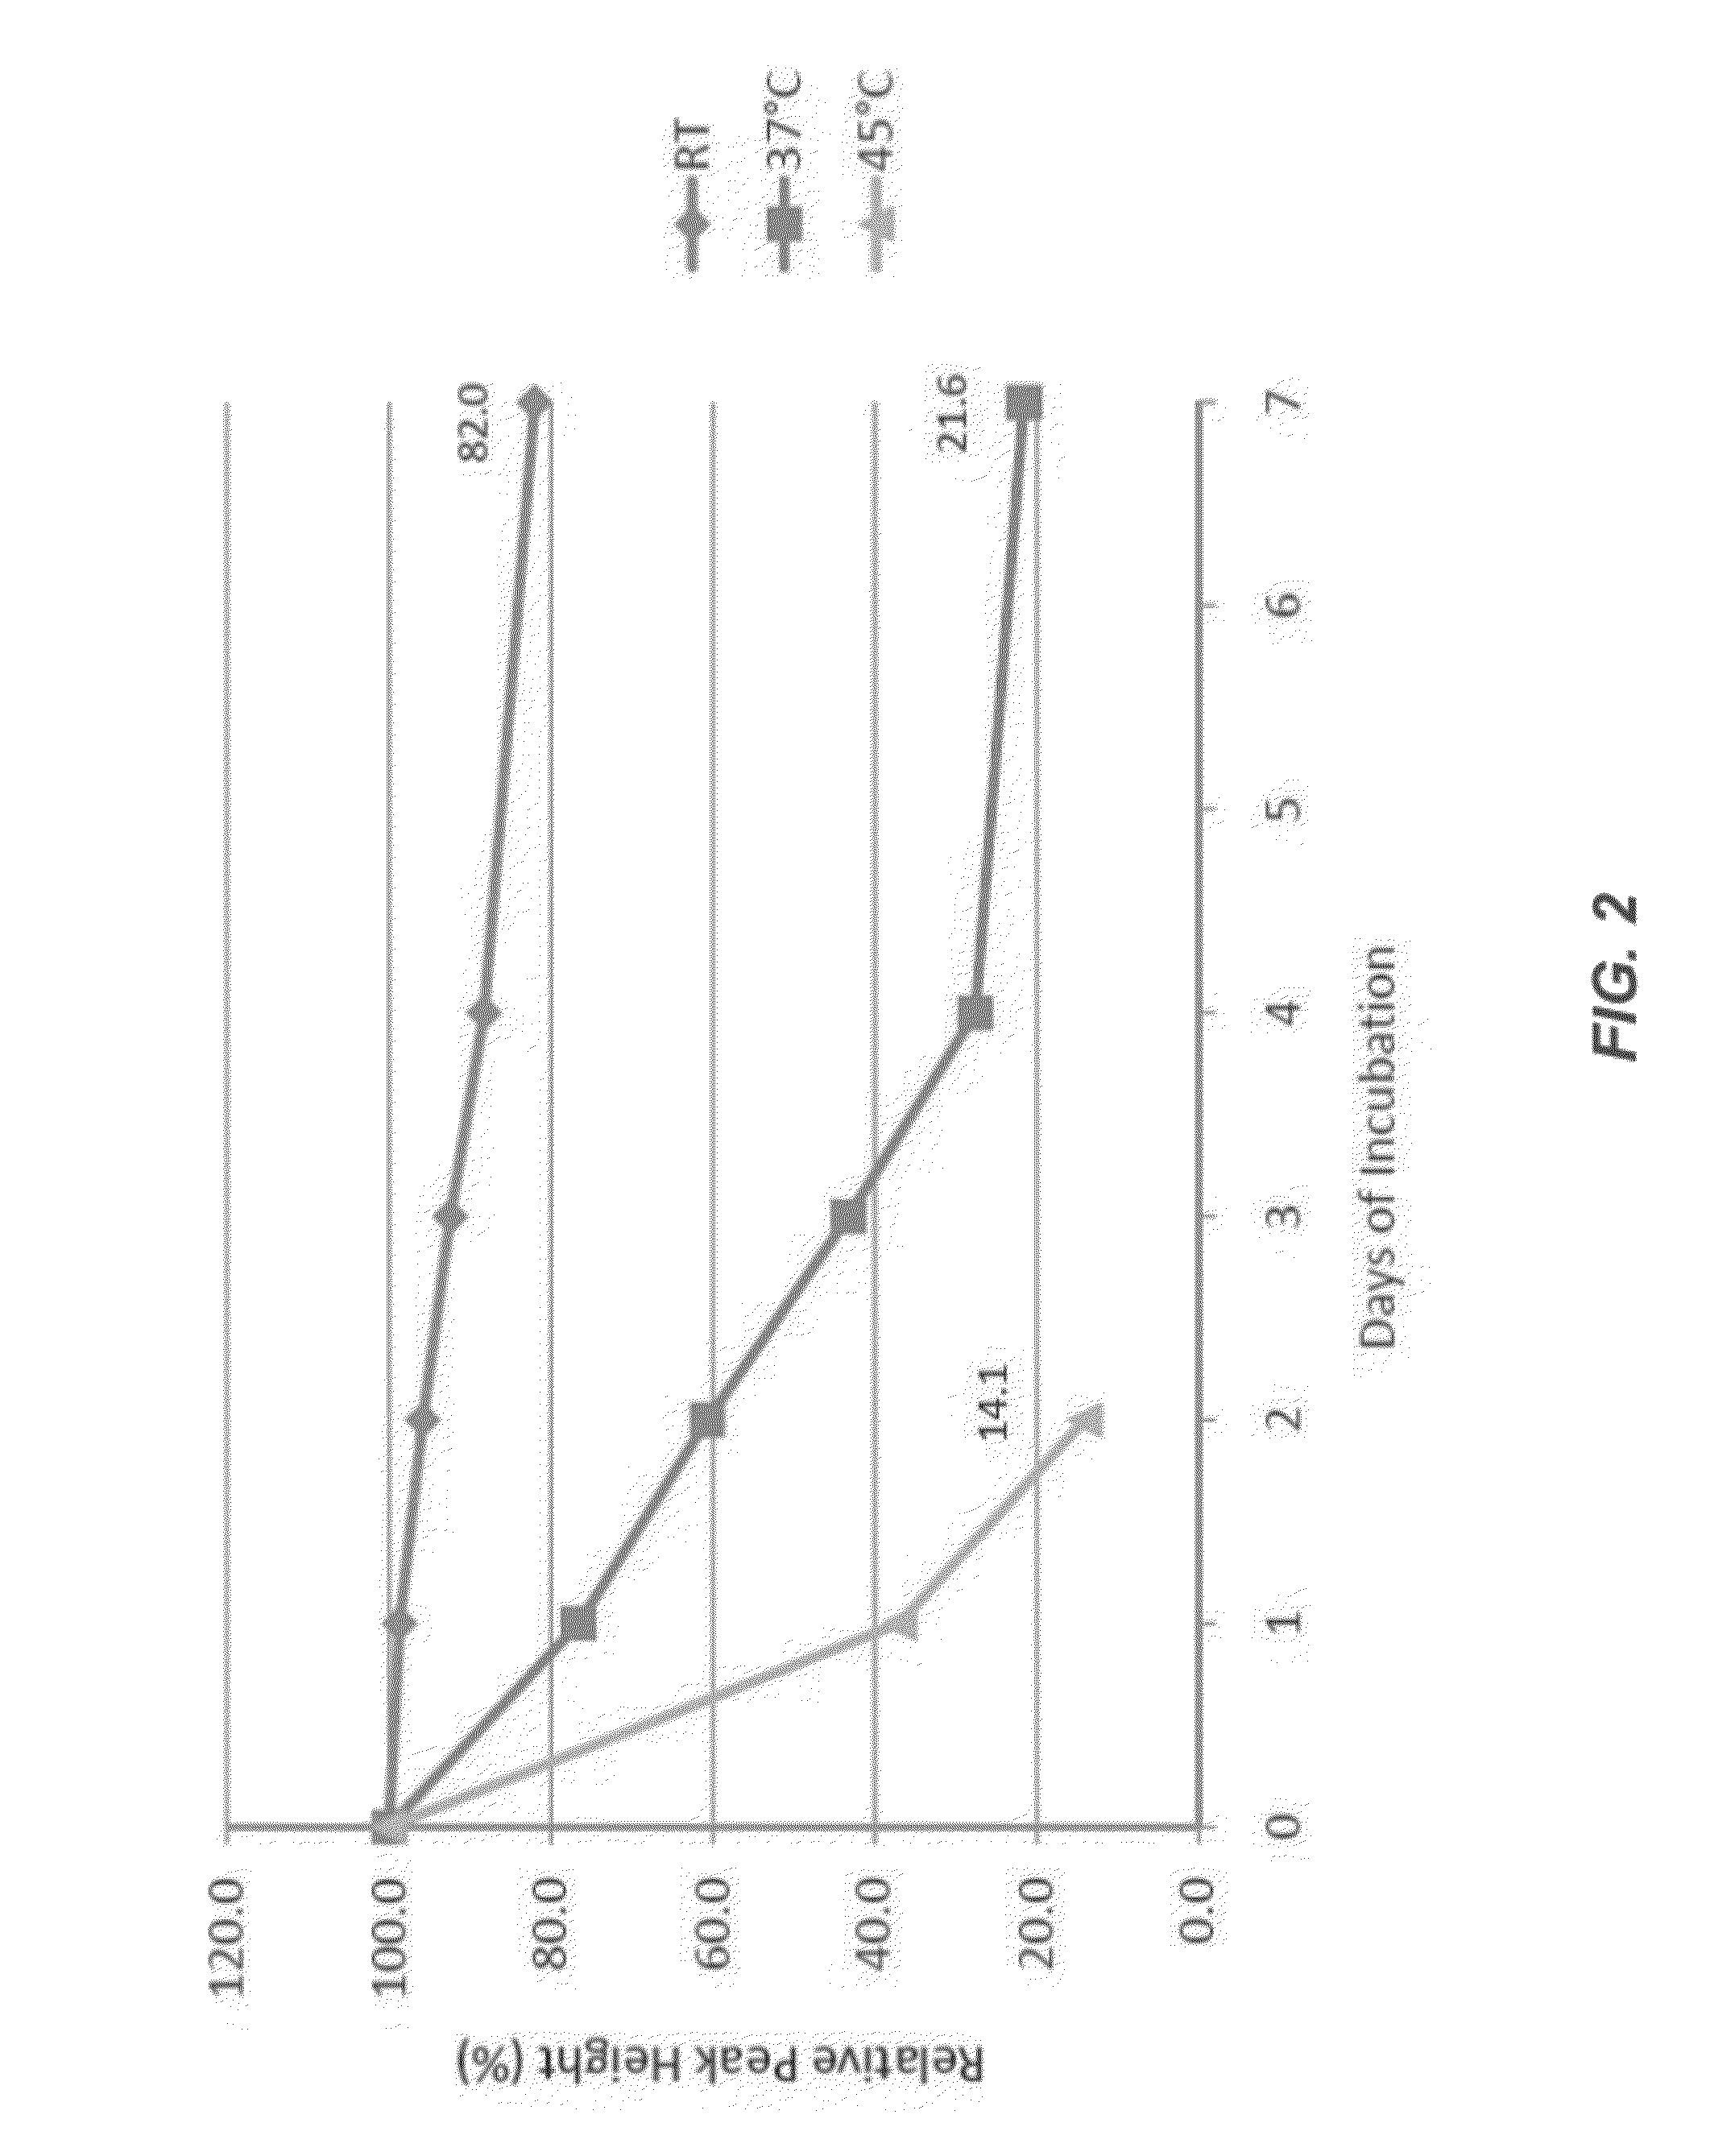 Formulations of recombinant furin